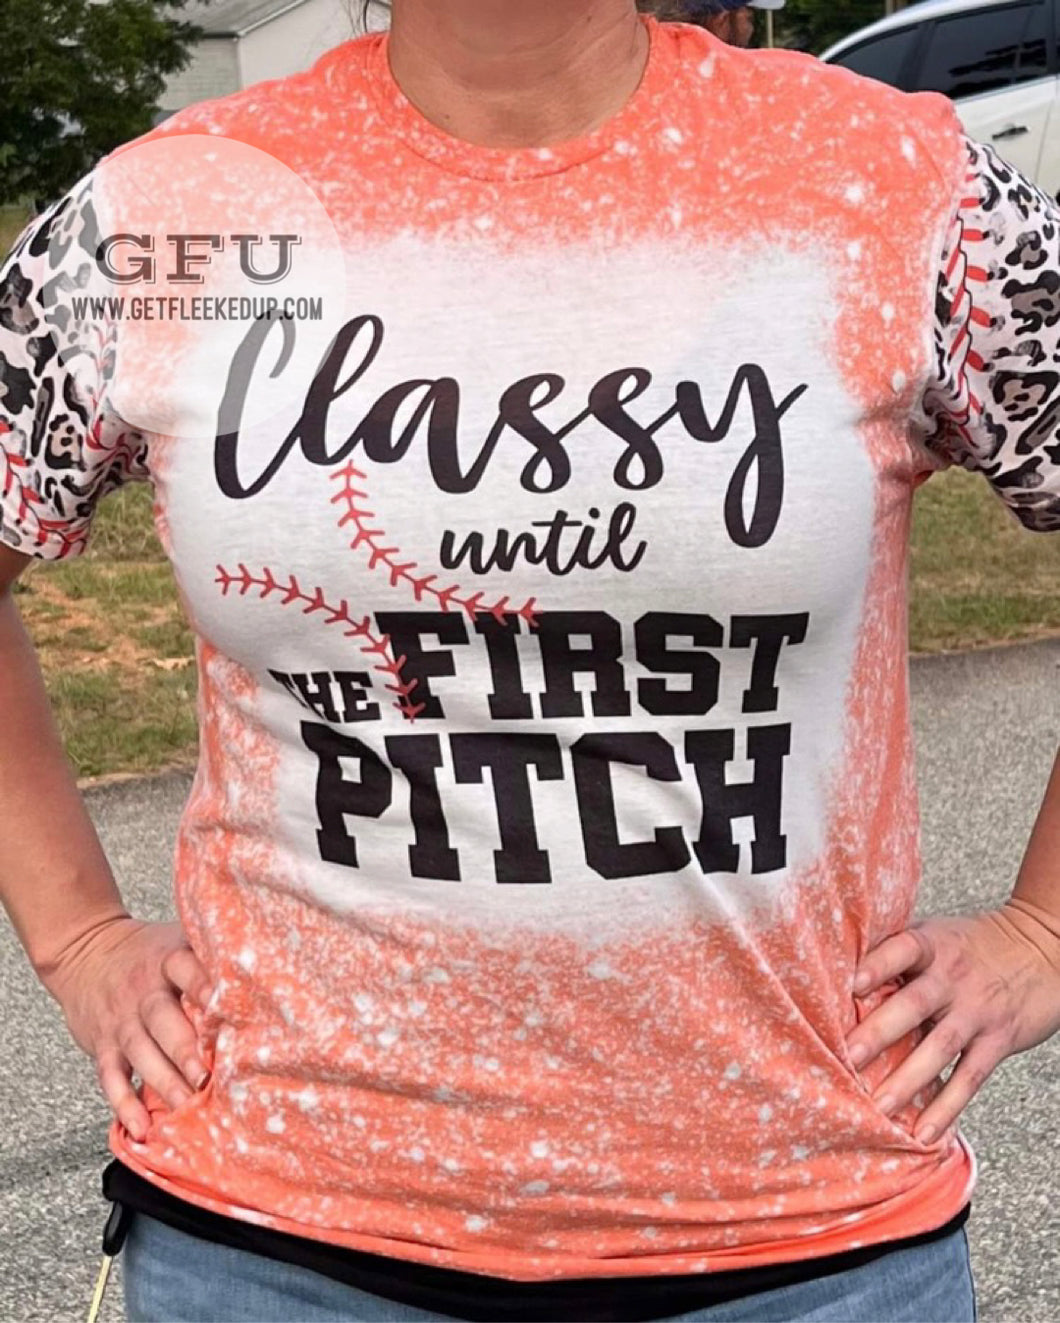 Classy until the First Pitch with baseball sleeves